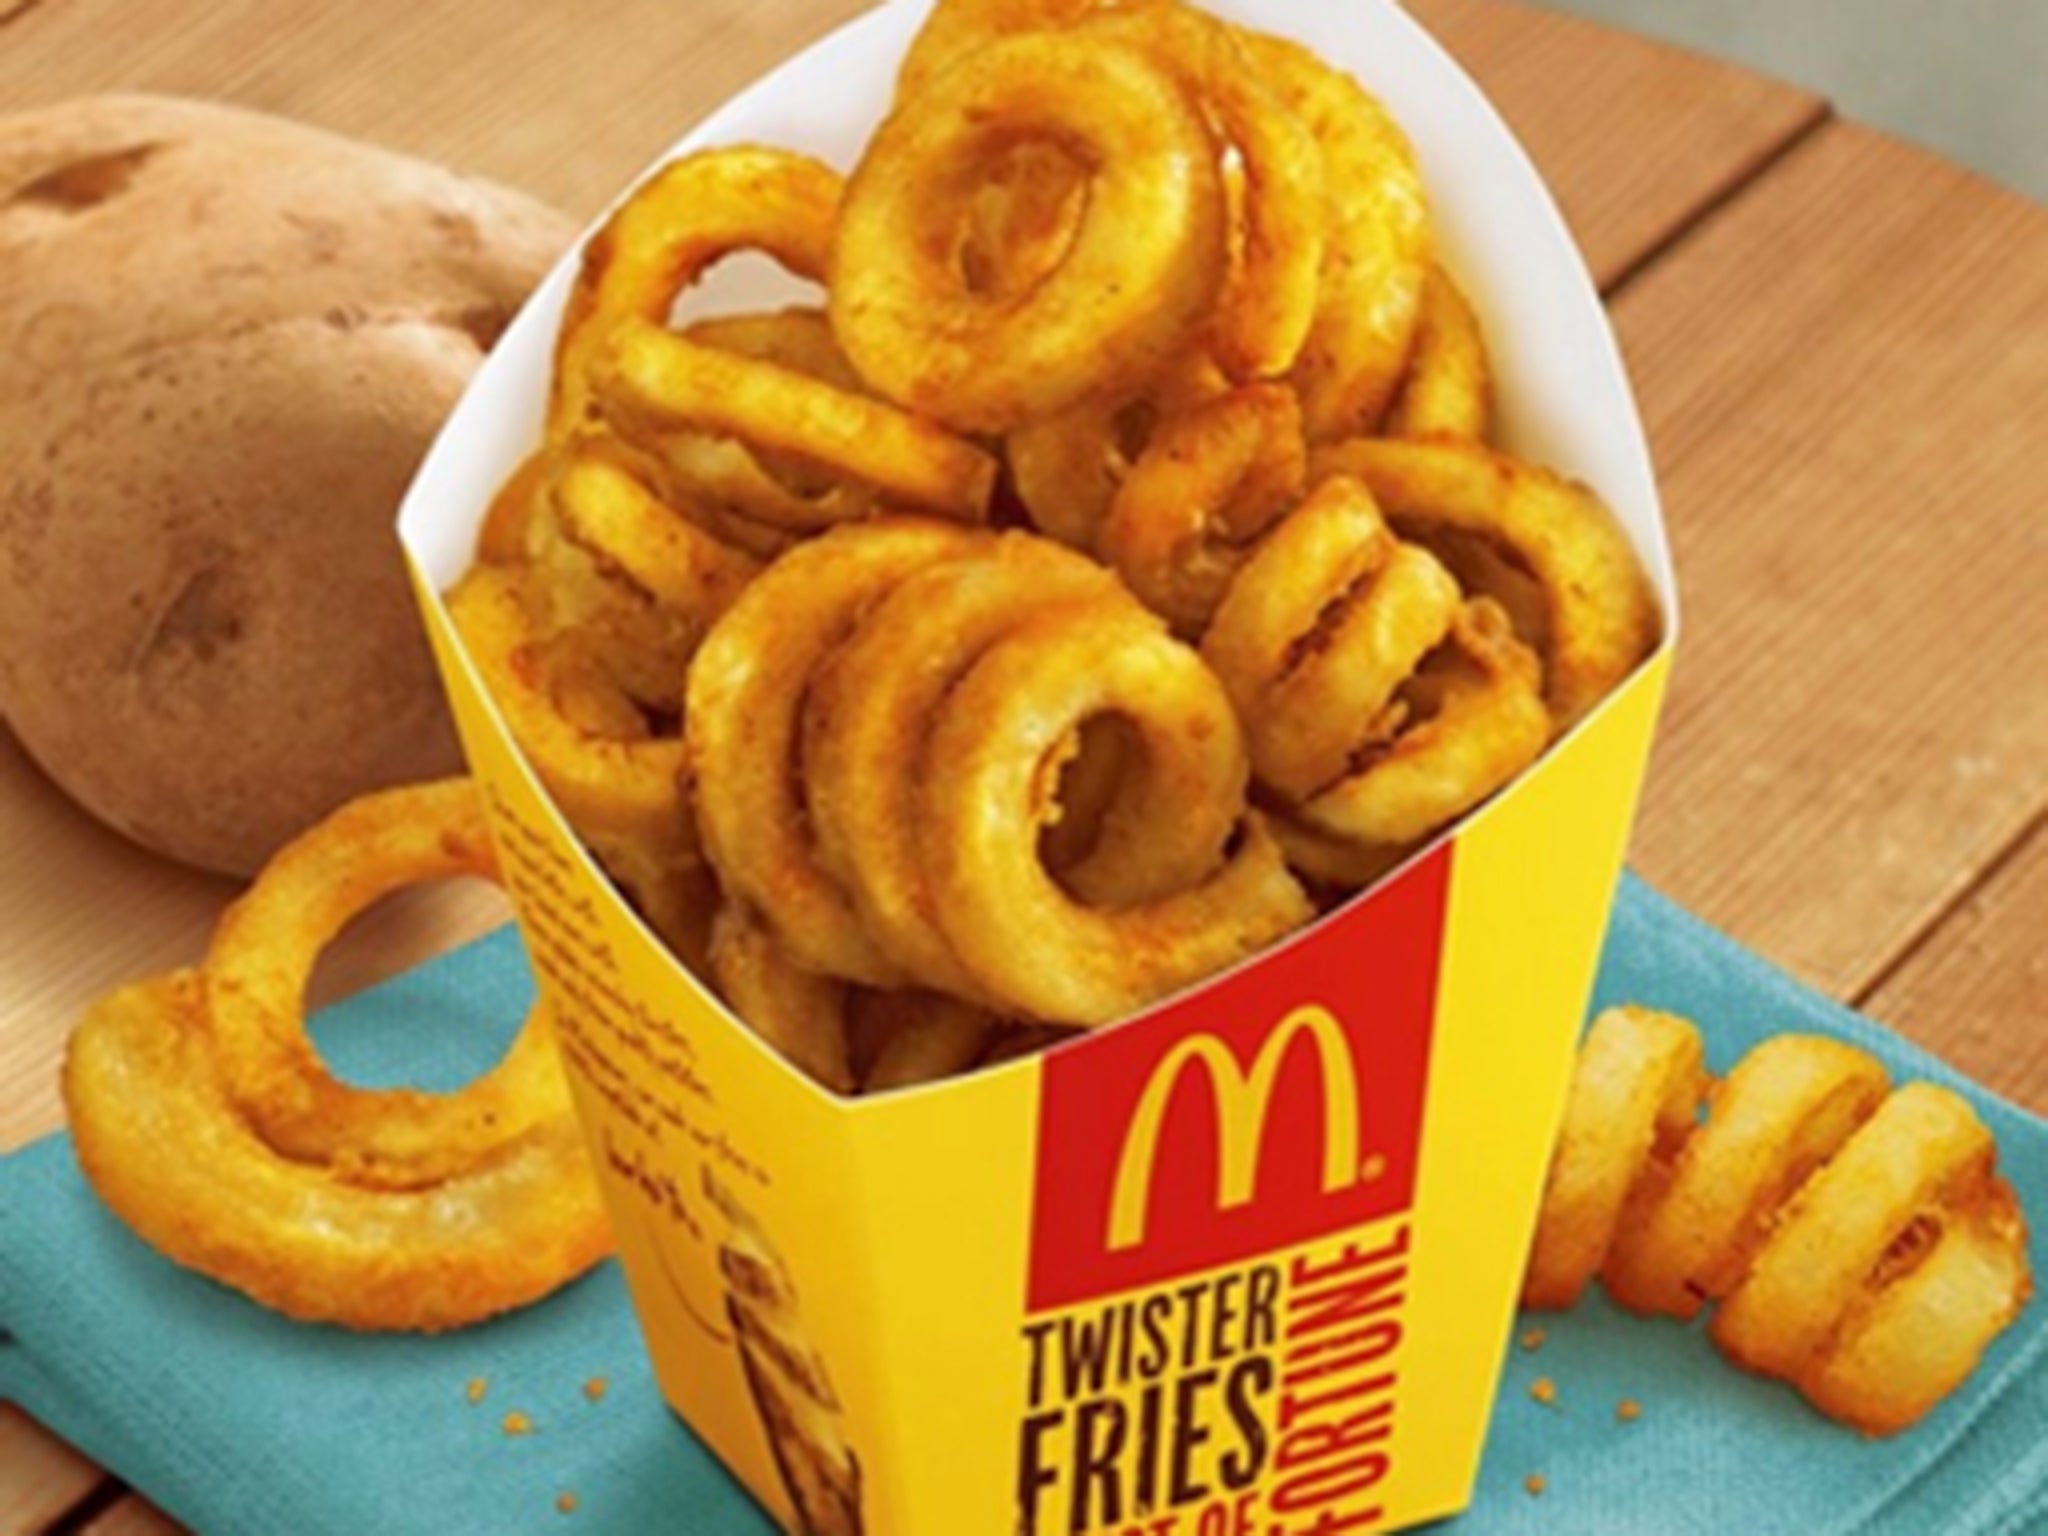 Twister Fries were reportedly first unveiled in 2015